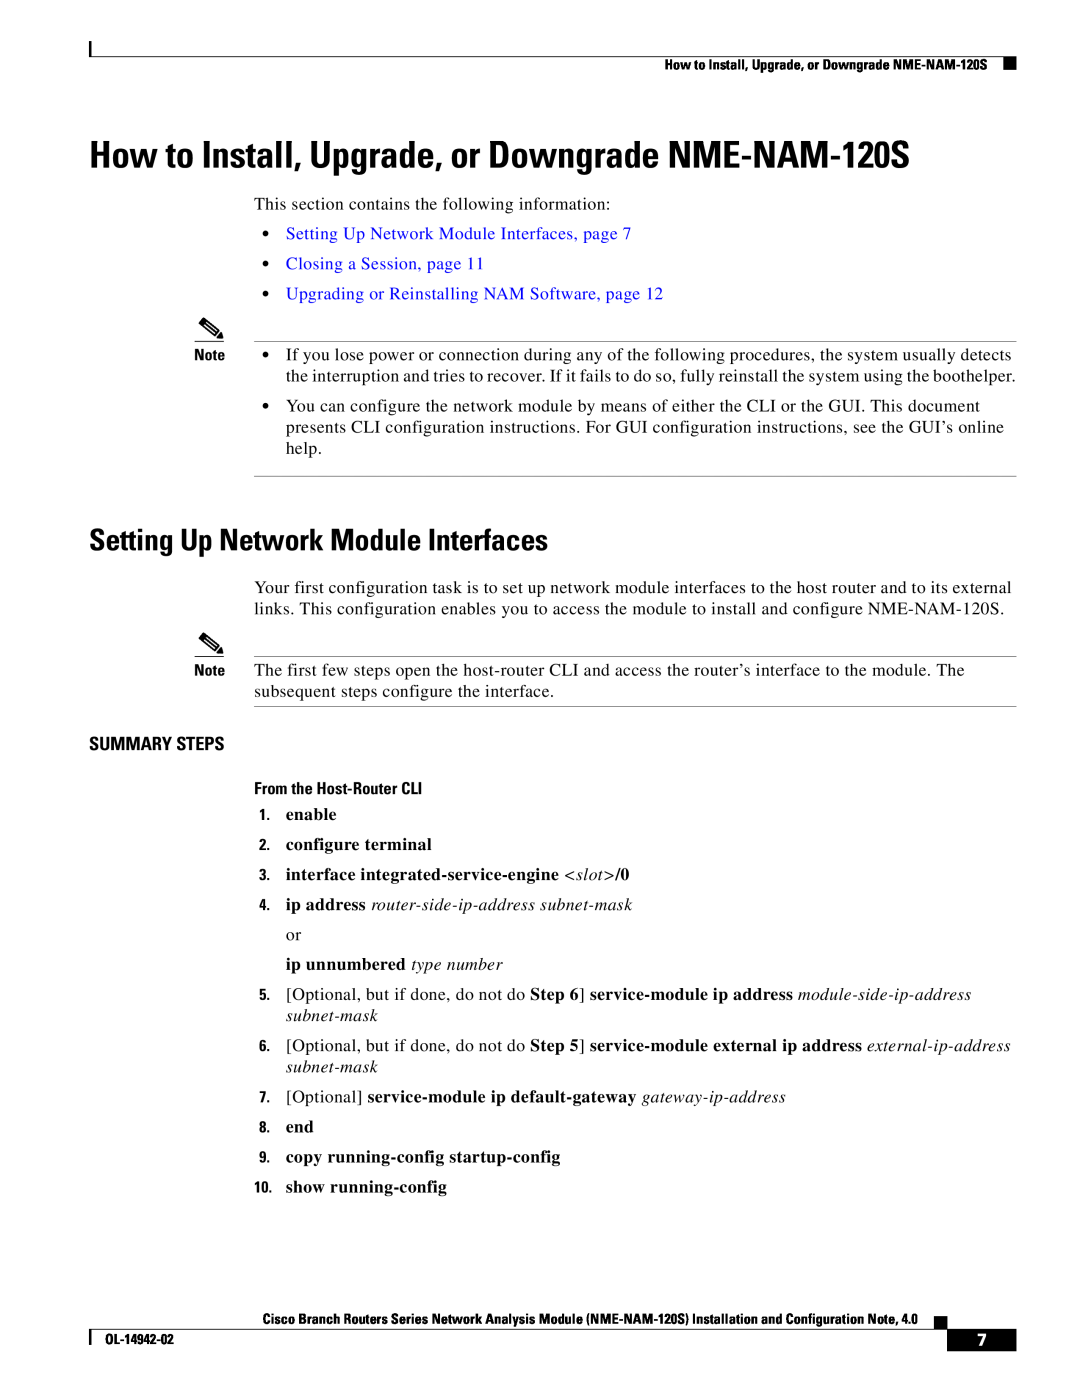 Cisco Systems SMNMADPTR manual How to Install, Upgrade, or Downgrade NME-NAM-120S, Setting Up Network Module Interfaces 